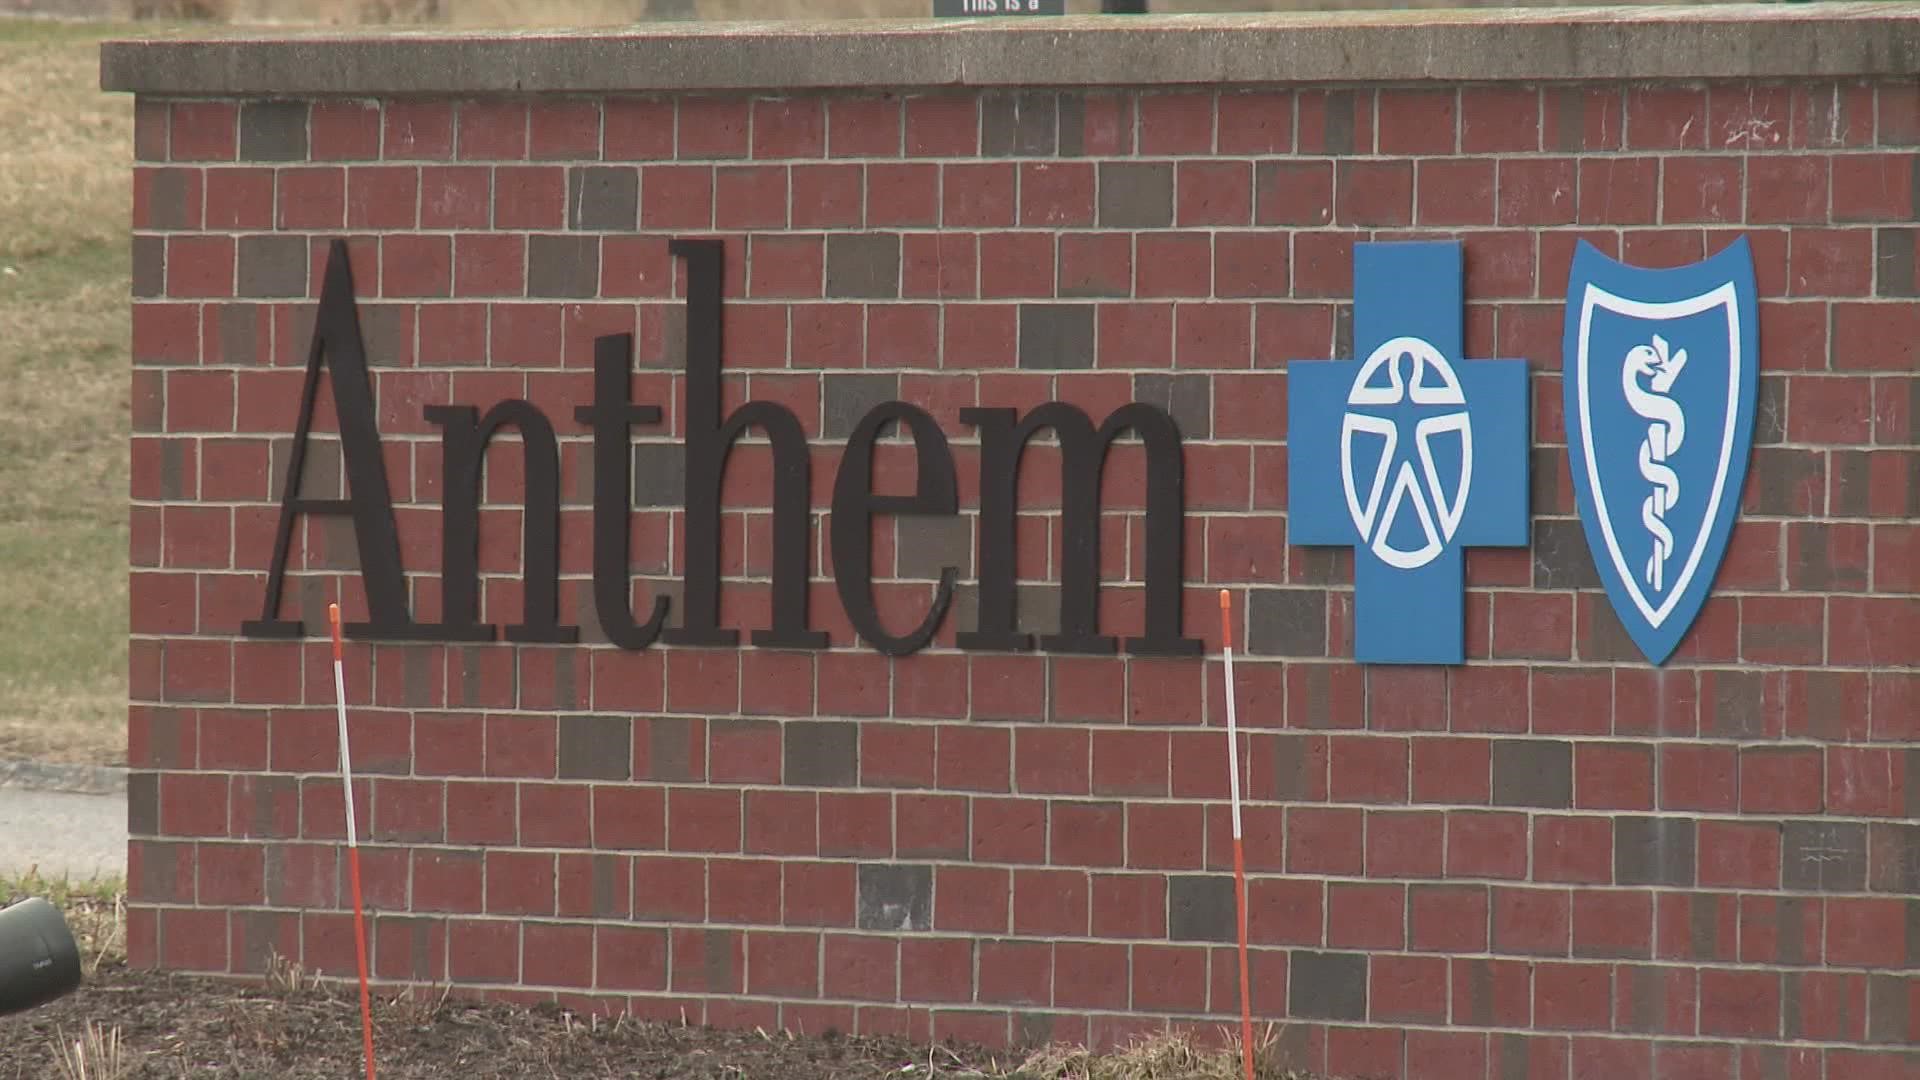 Beginning in 2023, Maine Medical Center will no longer be an in-network provider for Anthem health insurance.